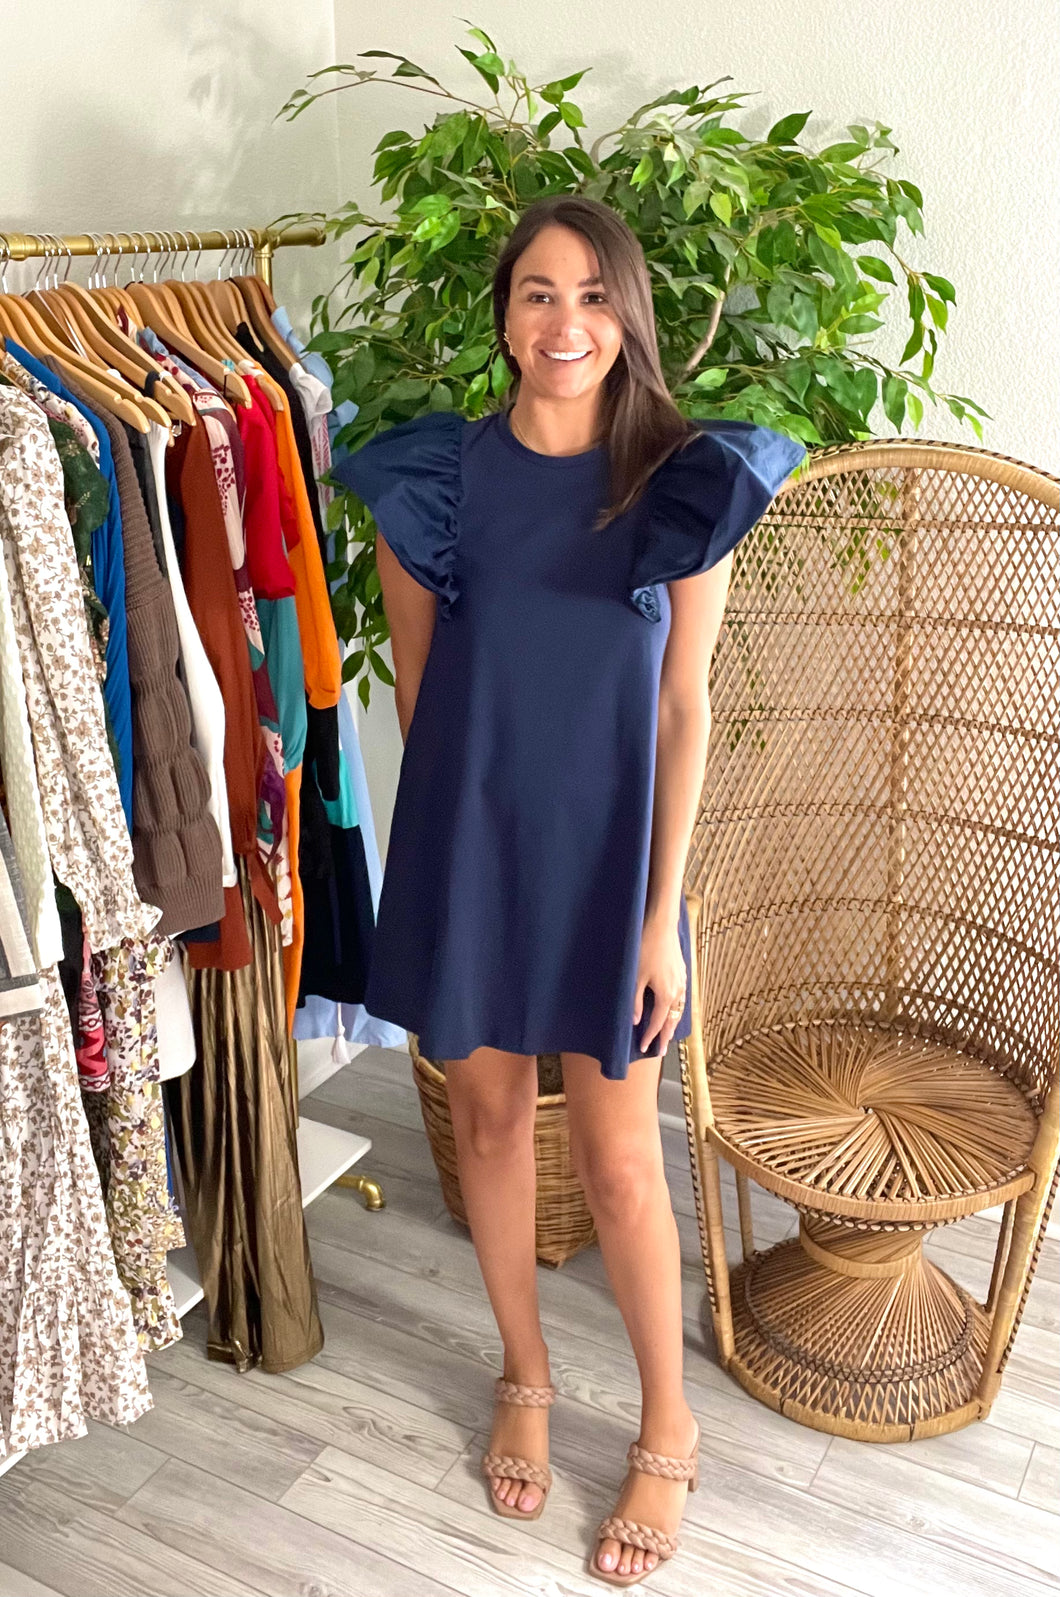 Navy t-shirt dress with dramatic flounced poplin cotton sleeves.   True to size, wearing size small. 5'5 - size up for length.